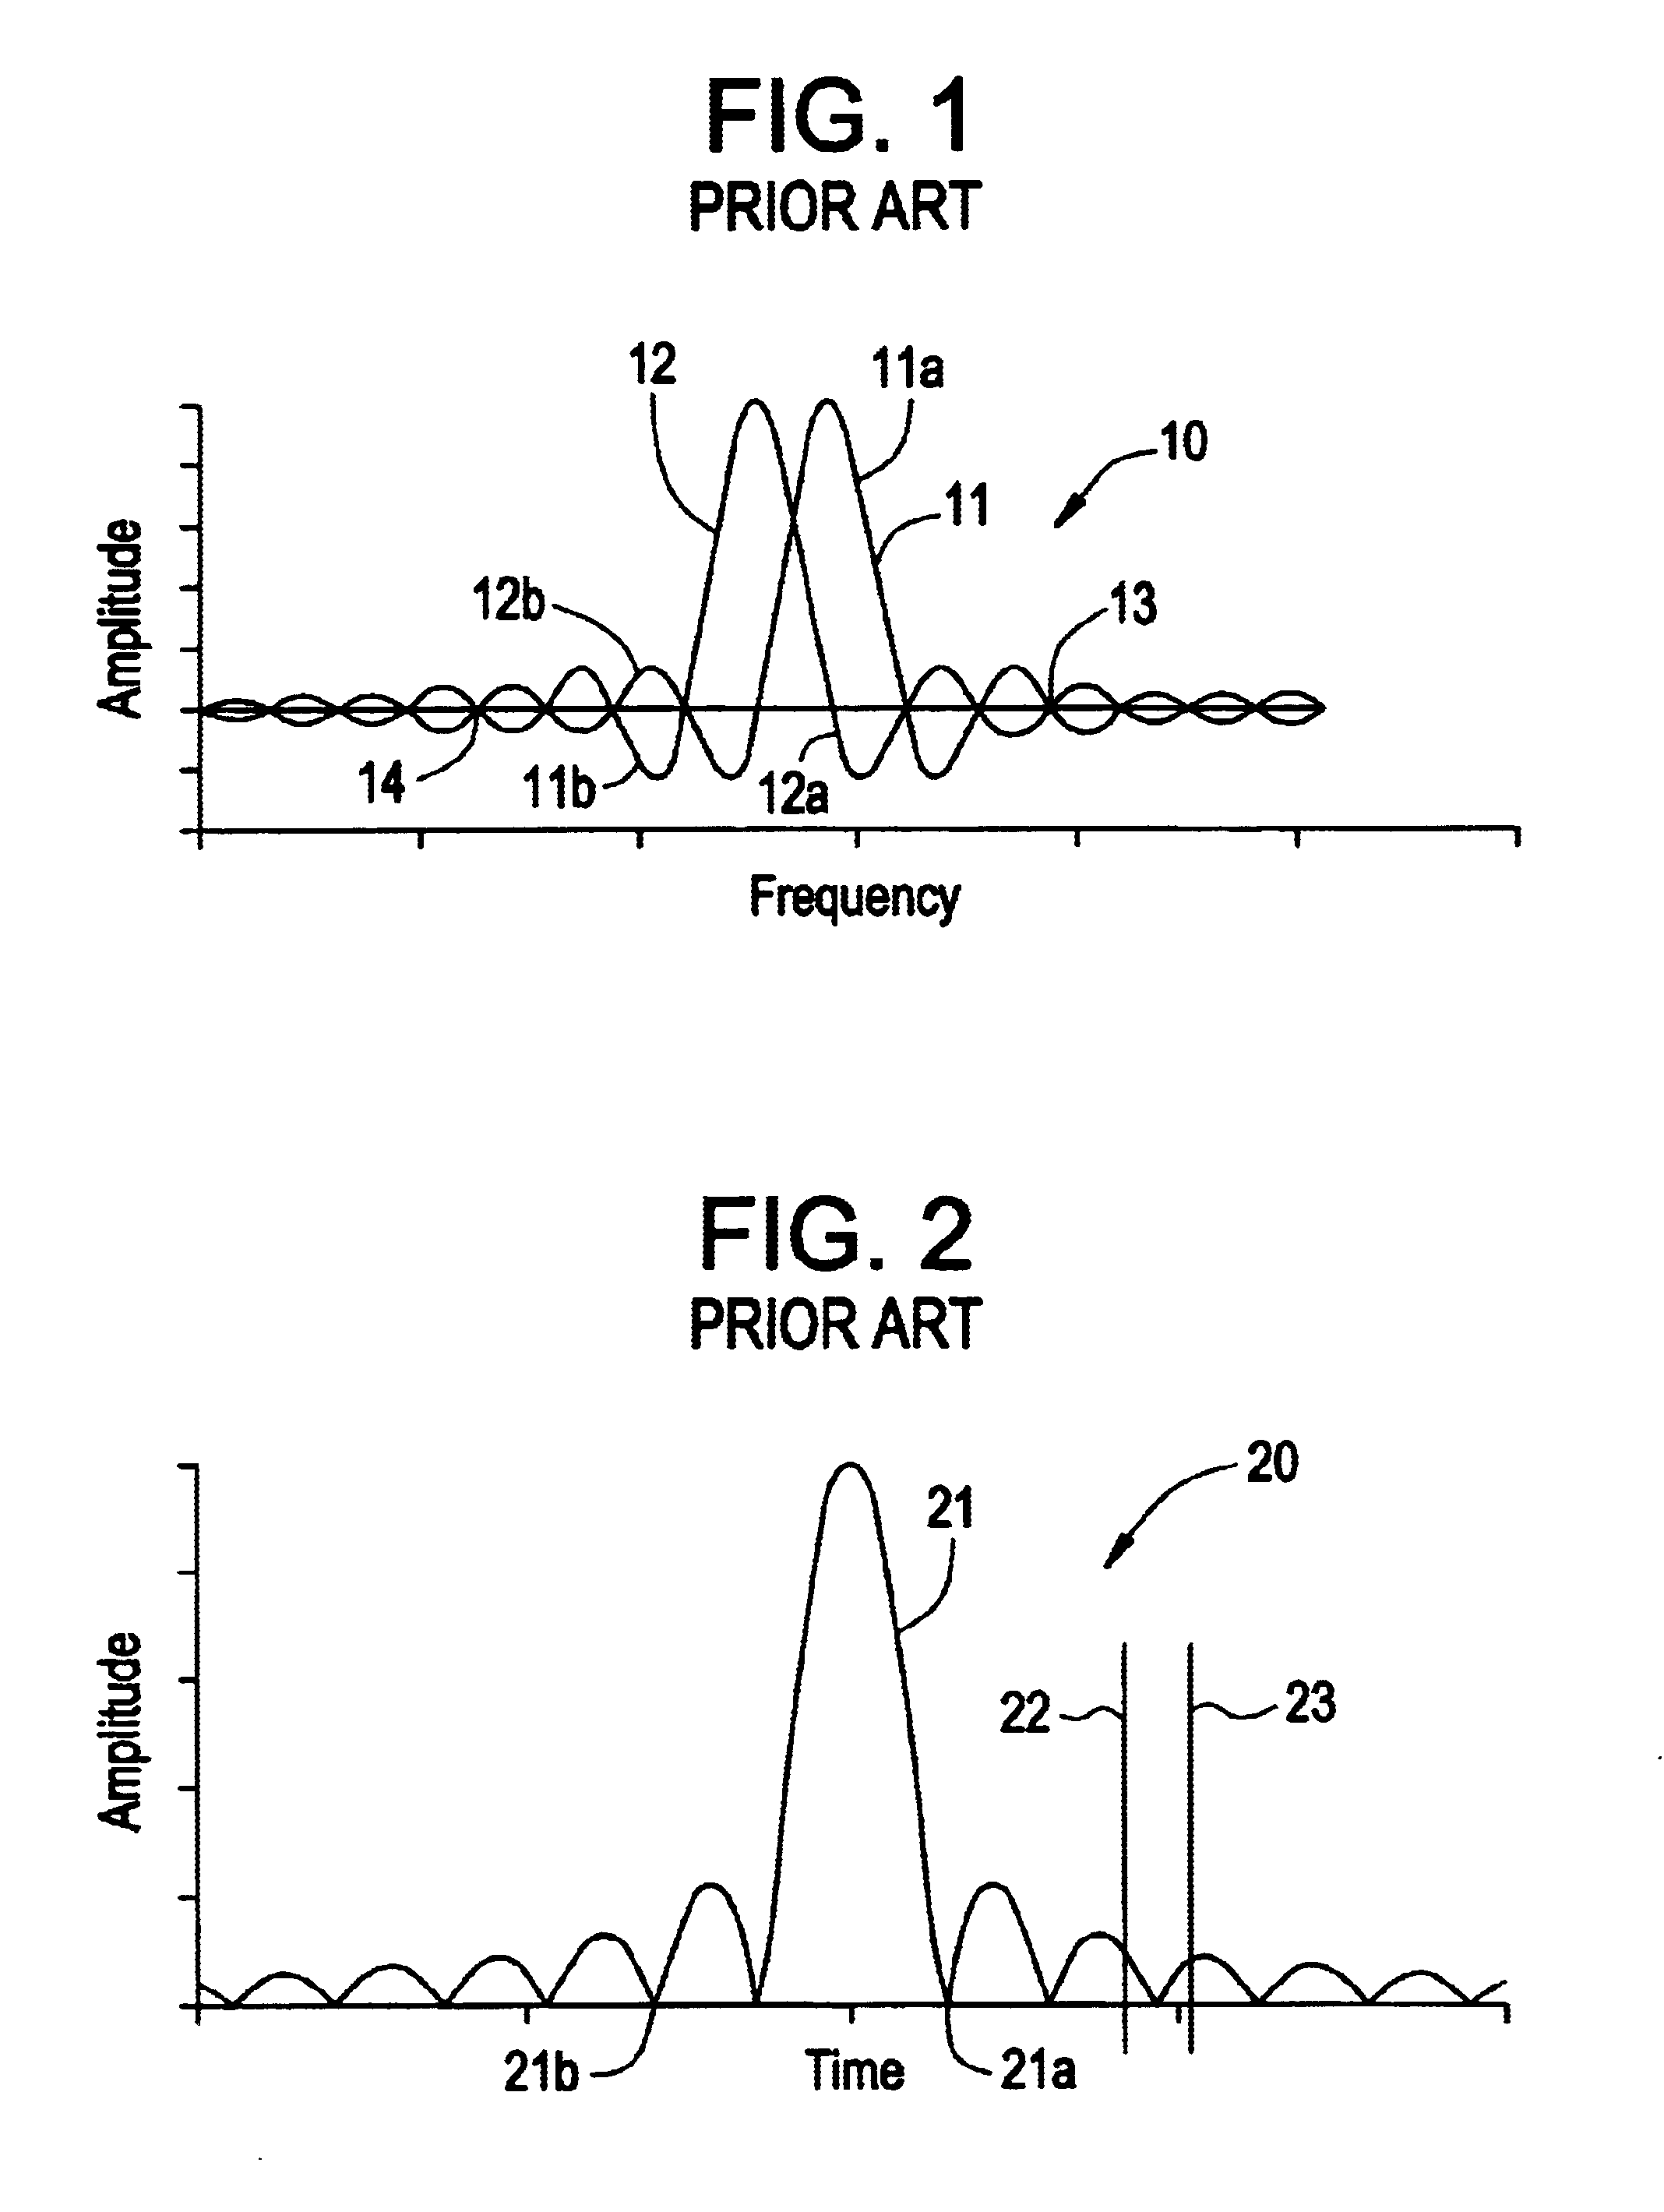 Electromagnetic matched filter based multiple access communications systems